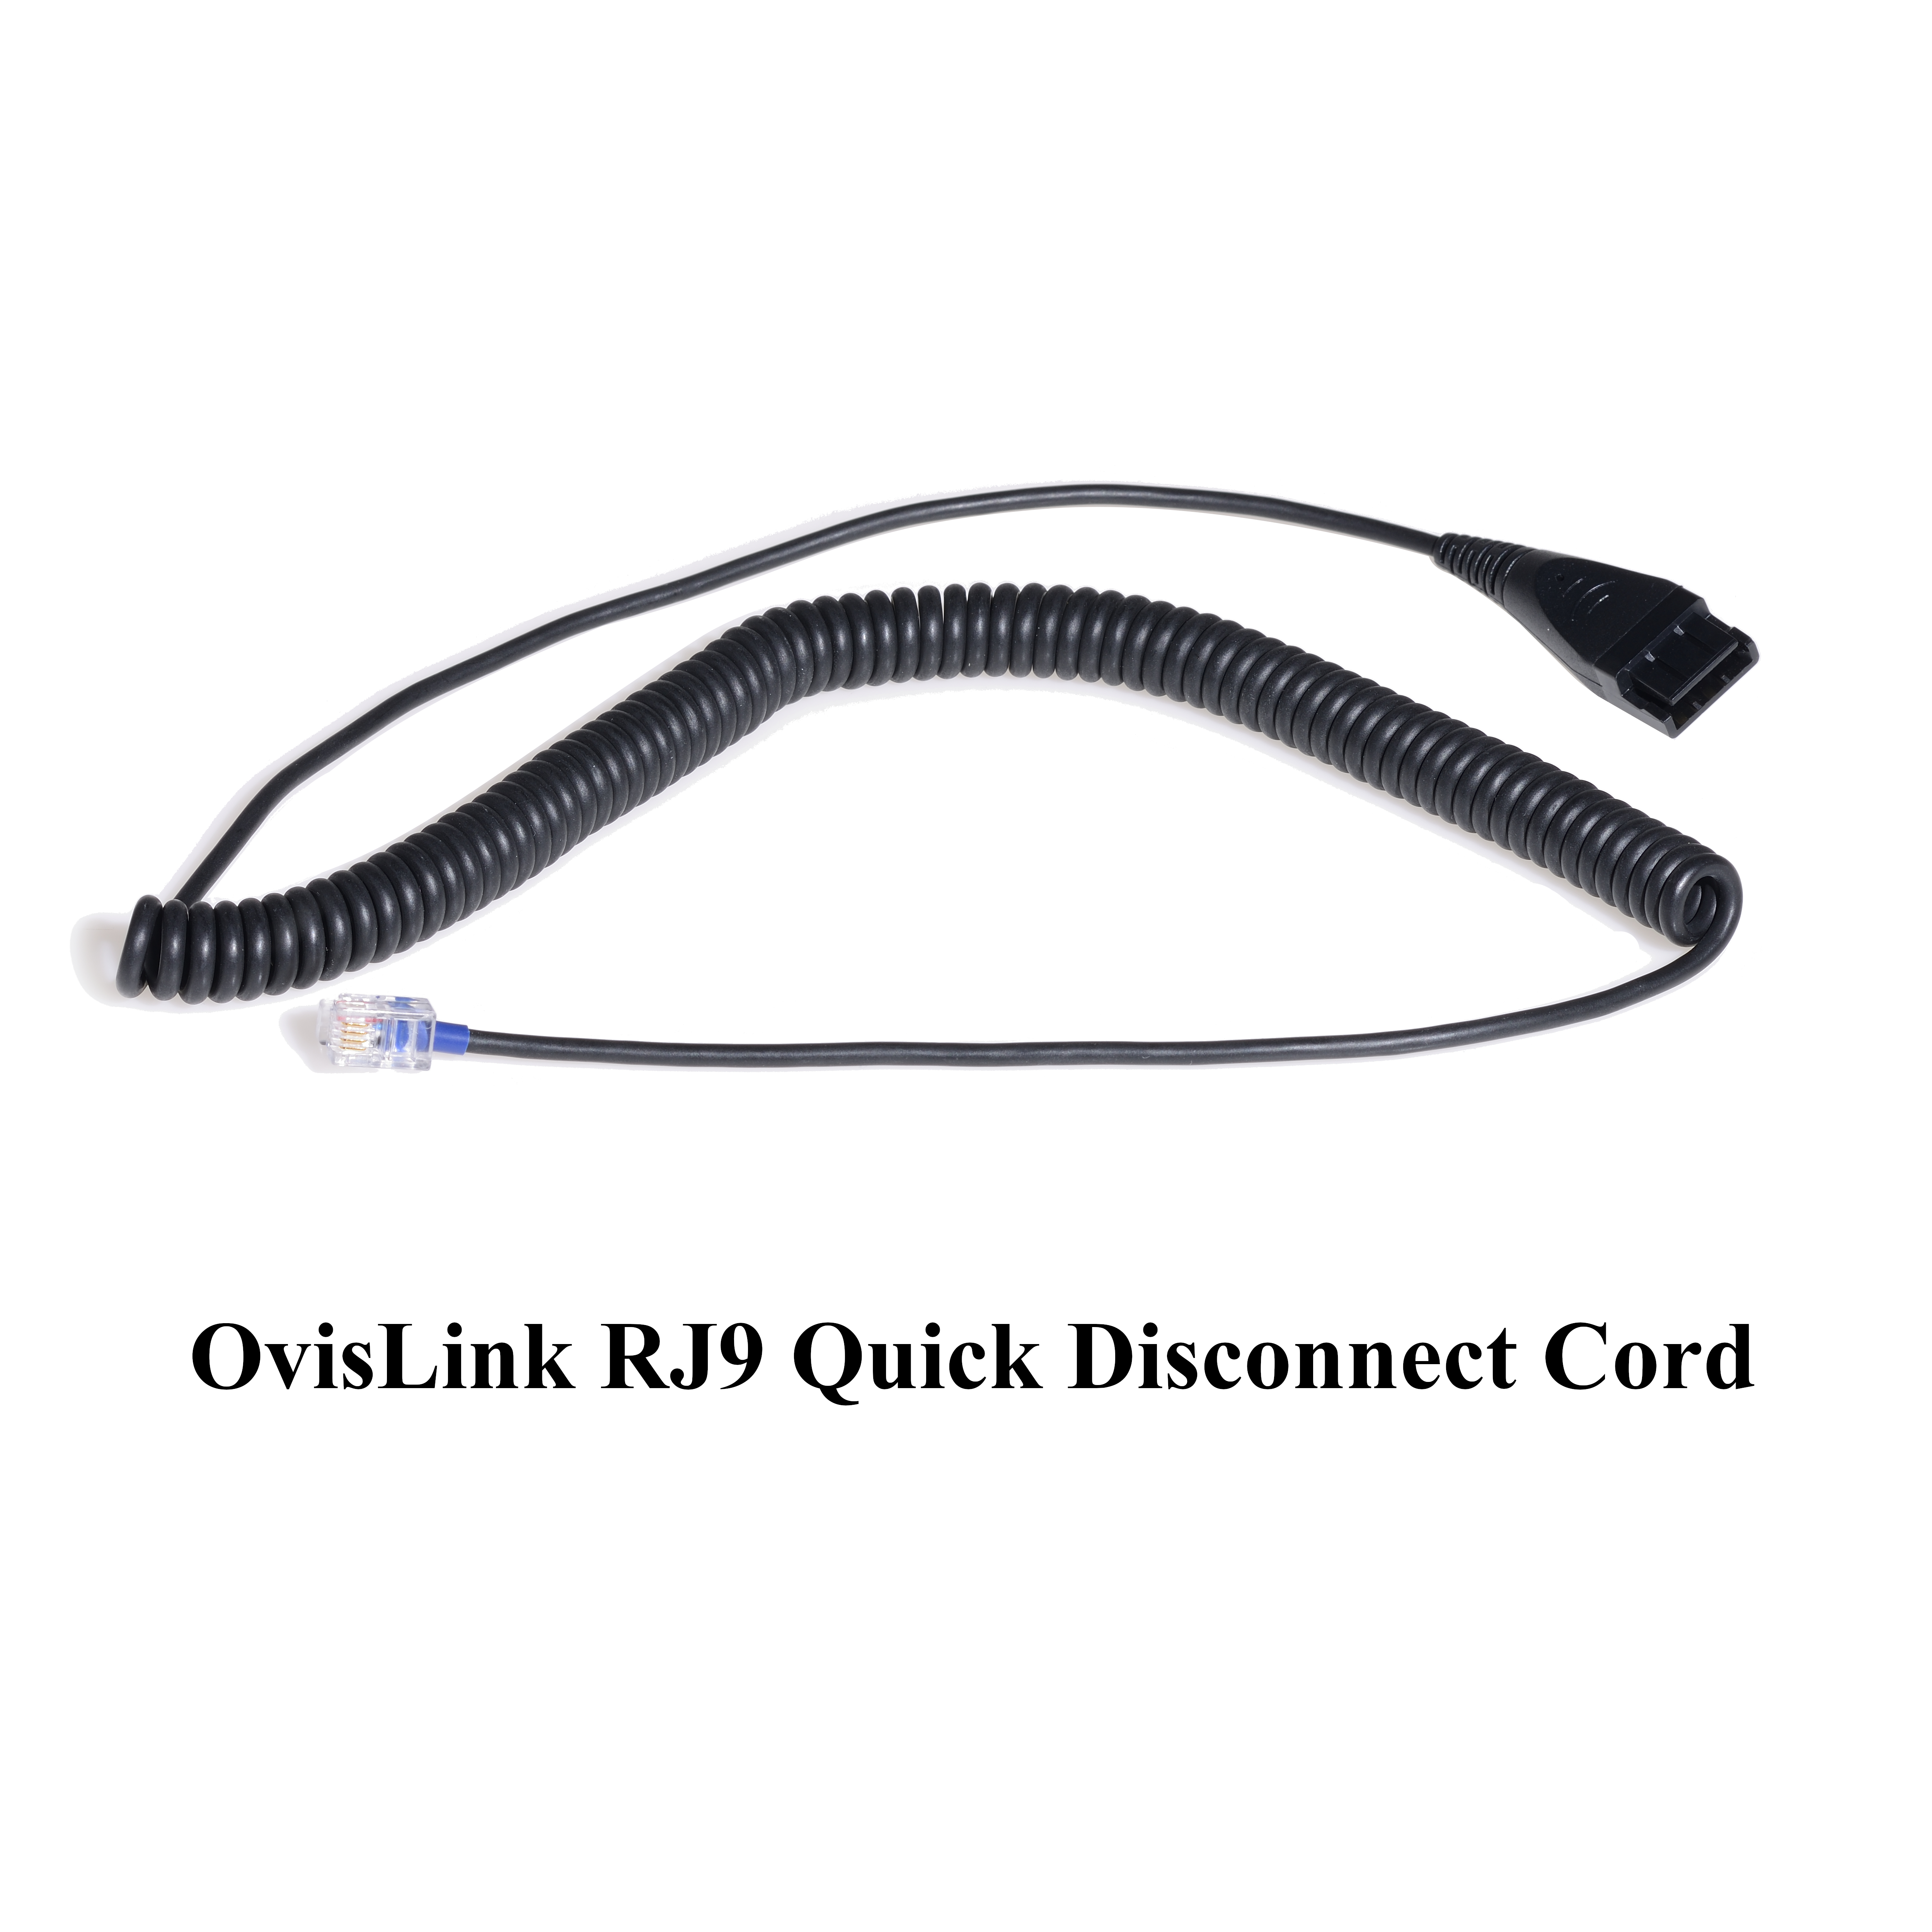 OvisLink Headset Quick Disconnect Cord